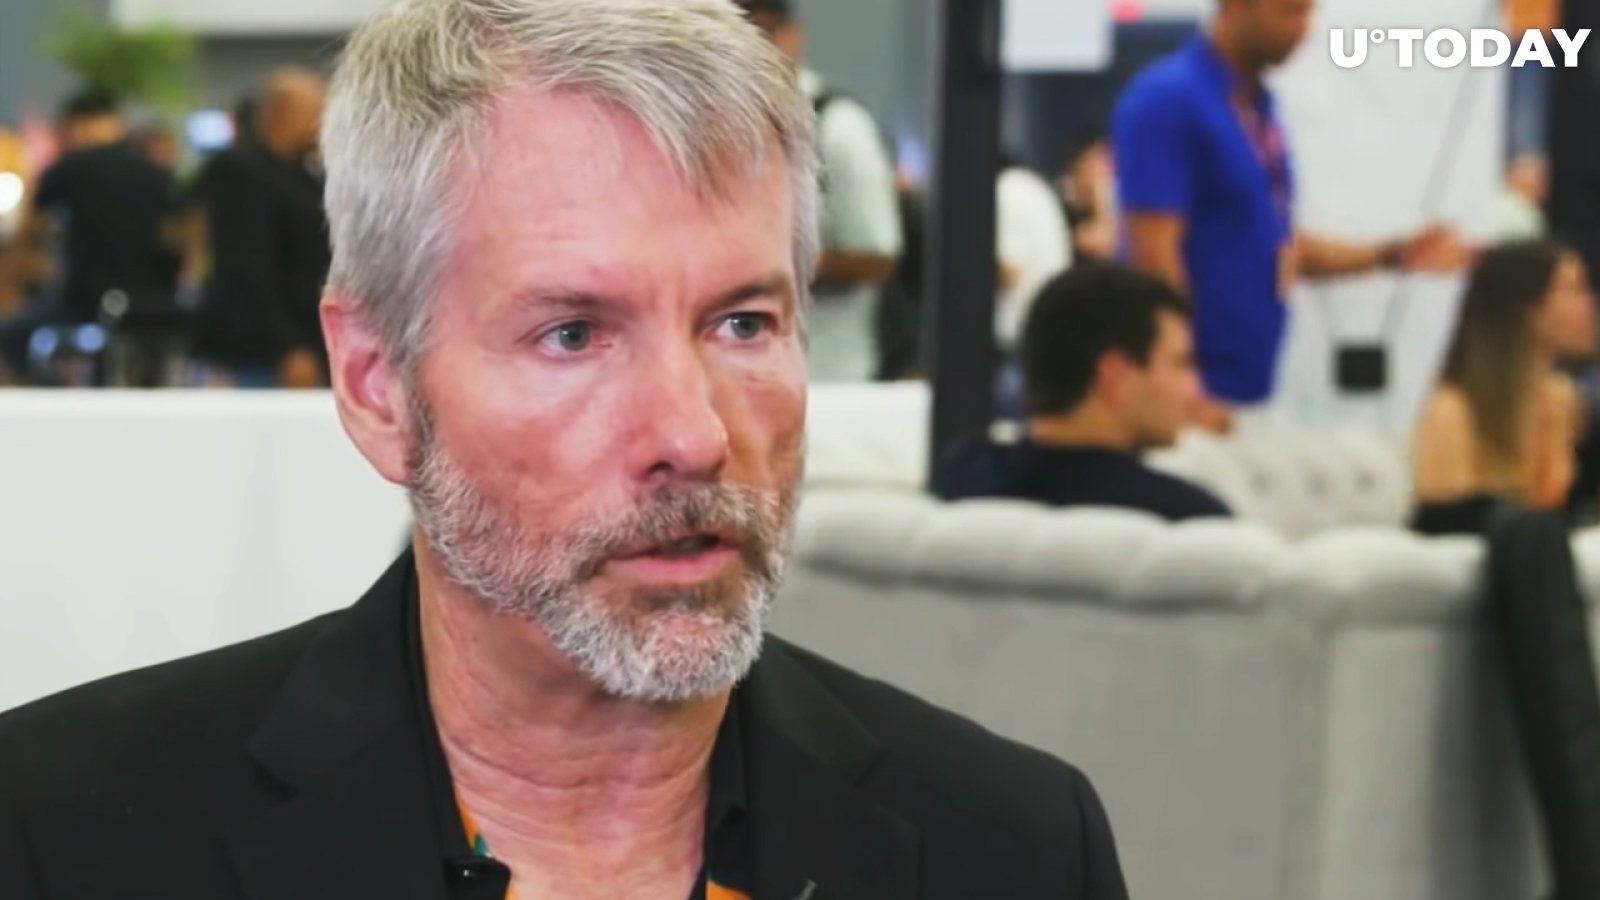 BREAKING: Bitcoin Advocate Michael Saylor to Step Down as MicroStrategy CEO